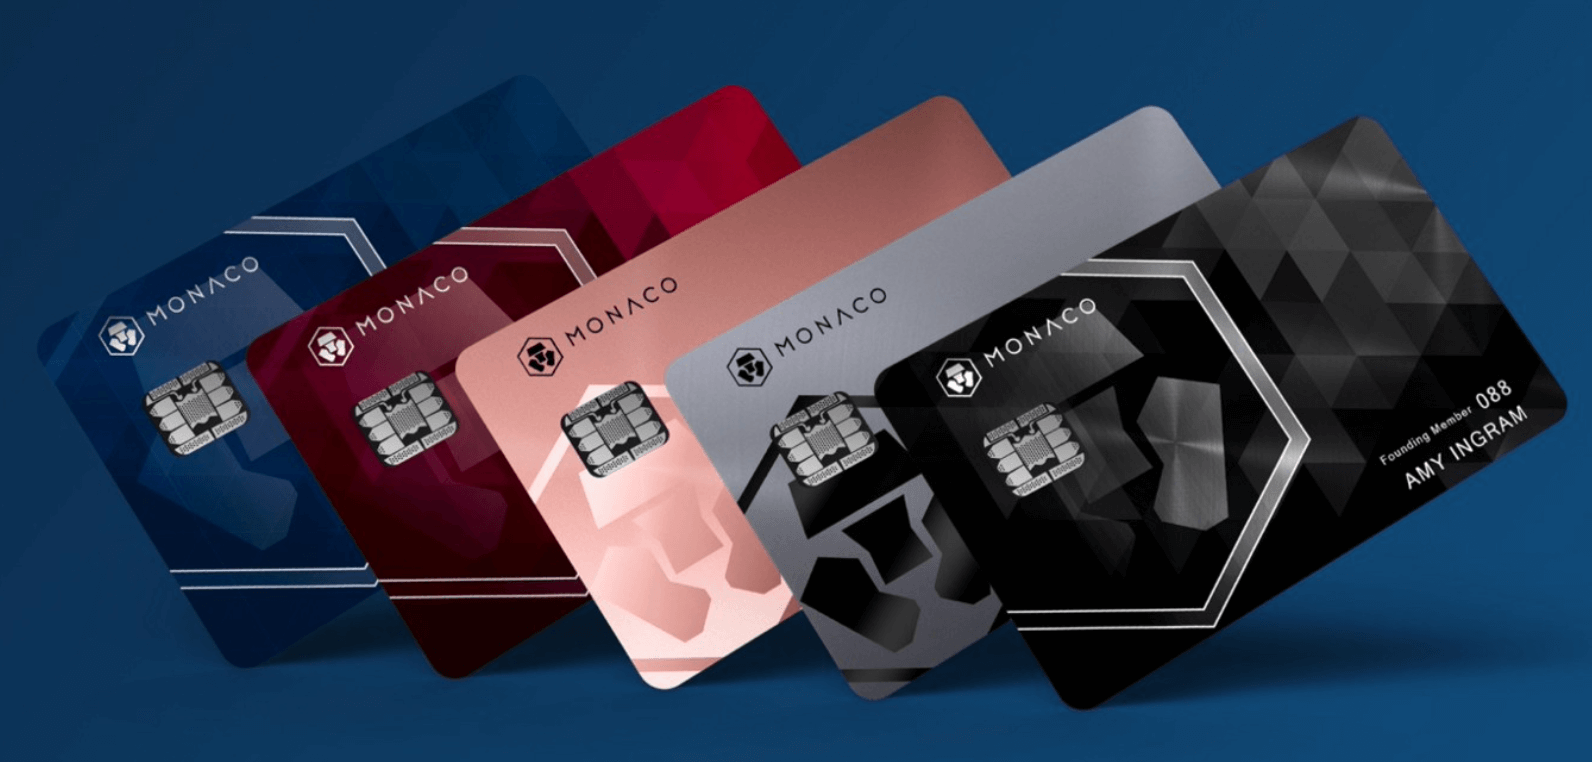 Monaco Technology unveils its 5 crypto cards in 2017 (Crypto.com today)